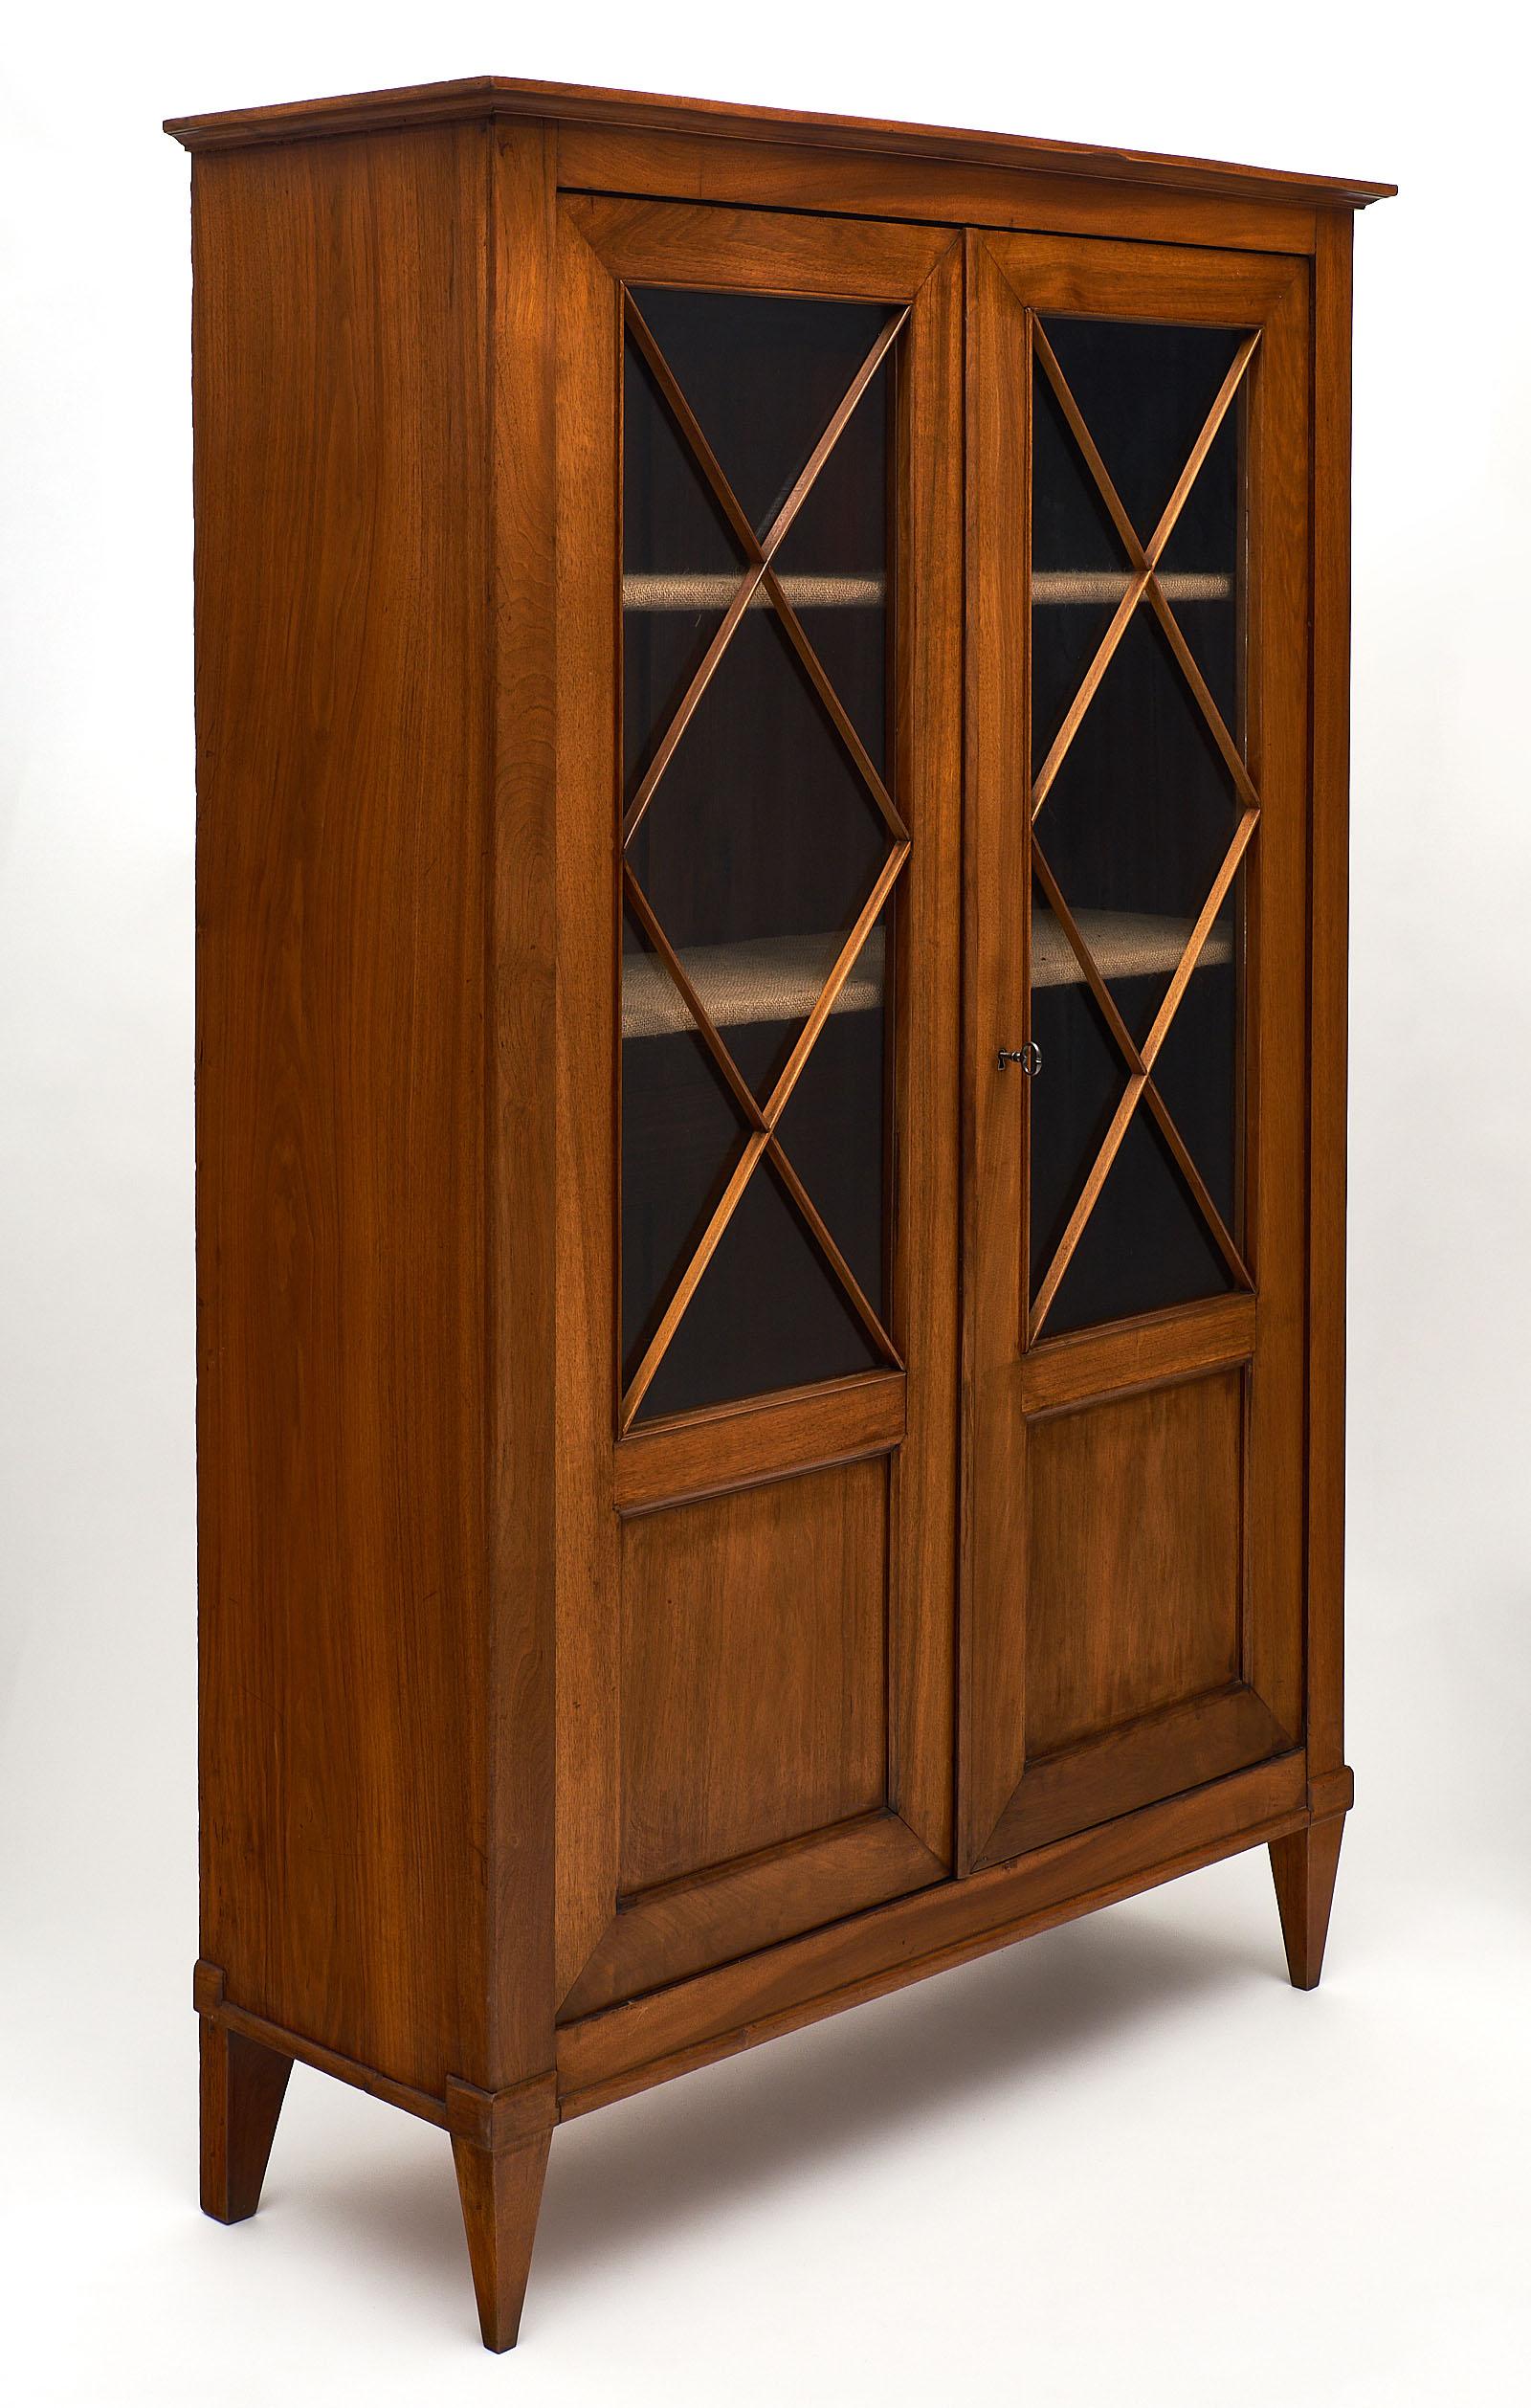 Elegant Directoire style French antique bookcase made of patinated cherrywood. We love the glass doors and interior shelving. The lock and key are in working condition and original to the piece.